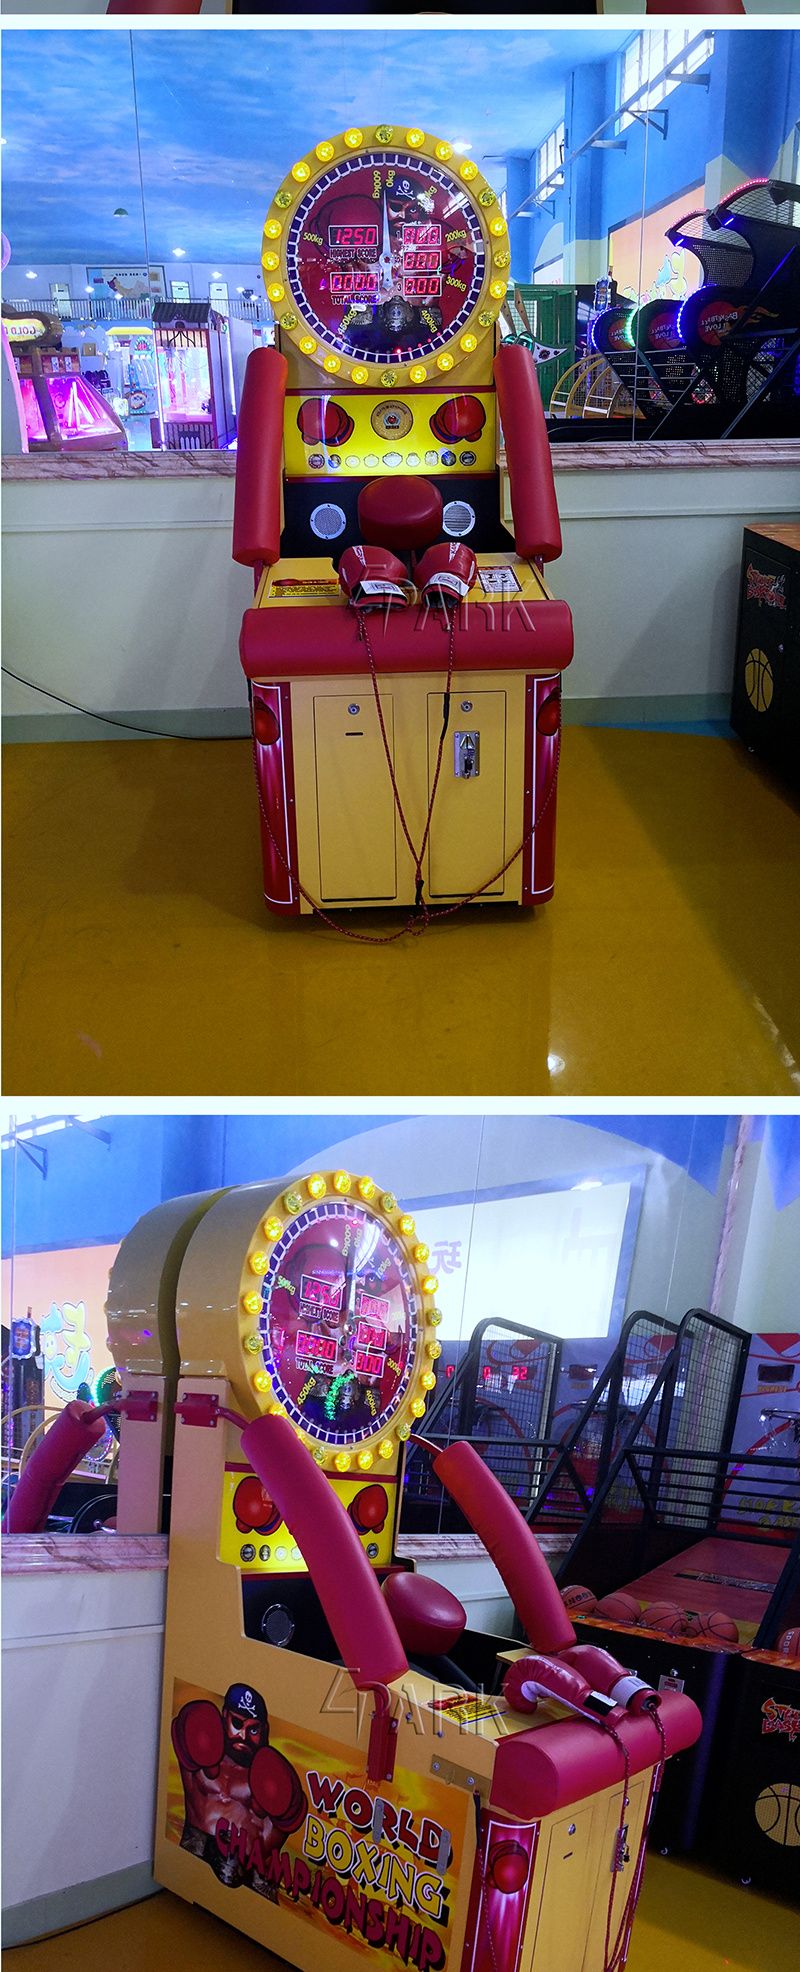 Amusement Park Indoor Games World Boxing Champion Boxing Game Ticket Machine Coin Operated